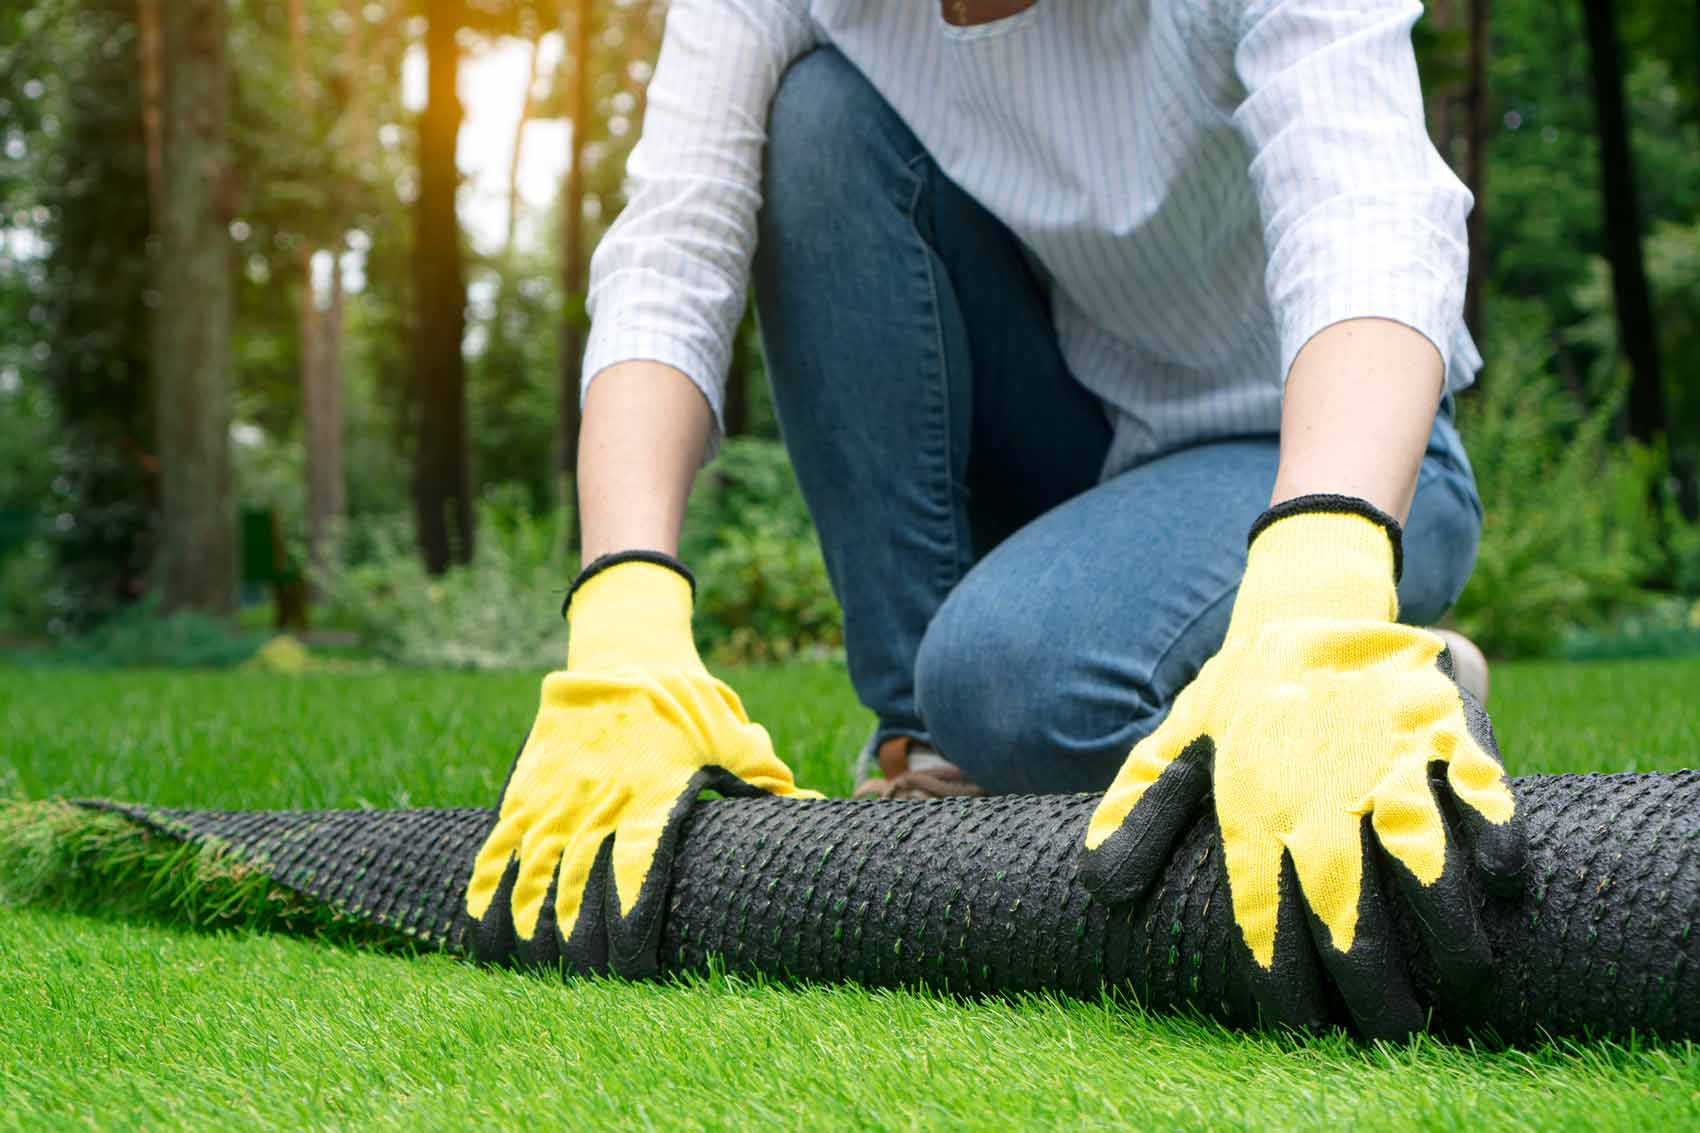 Best Artificial Turf Ideas For Your Home